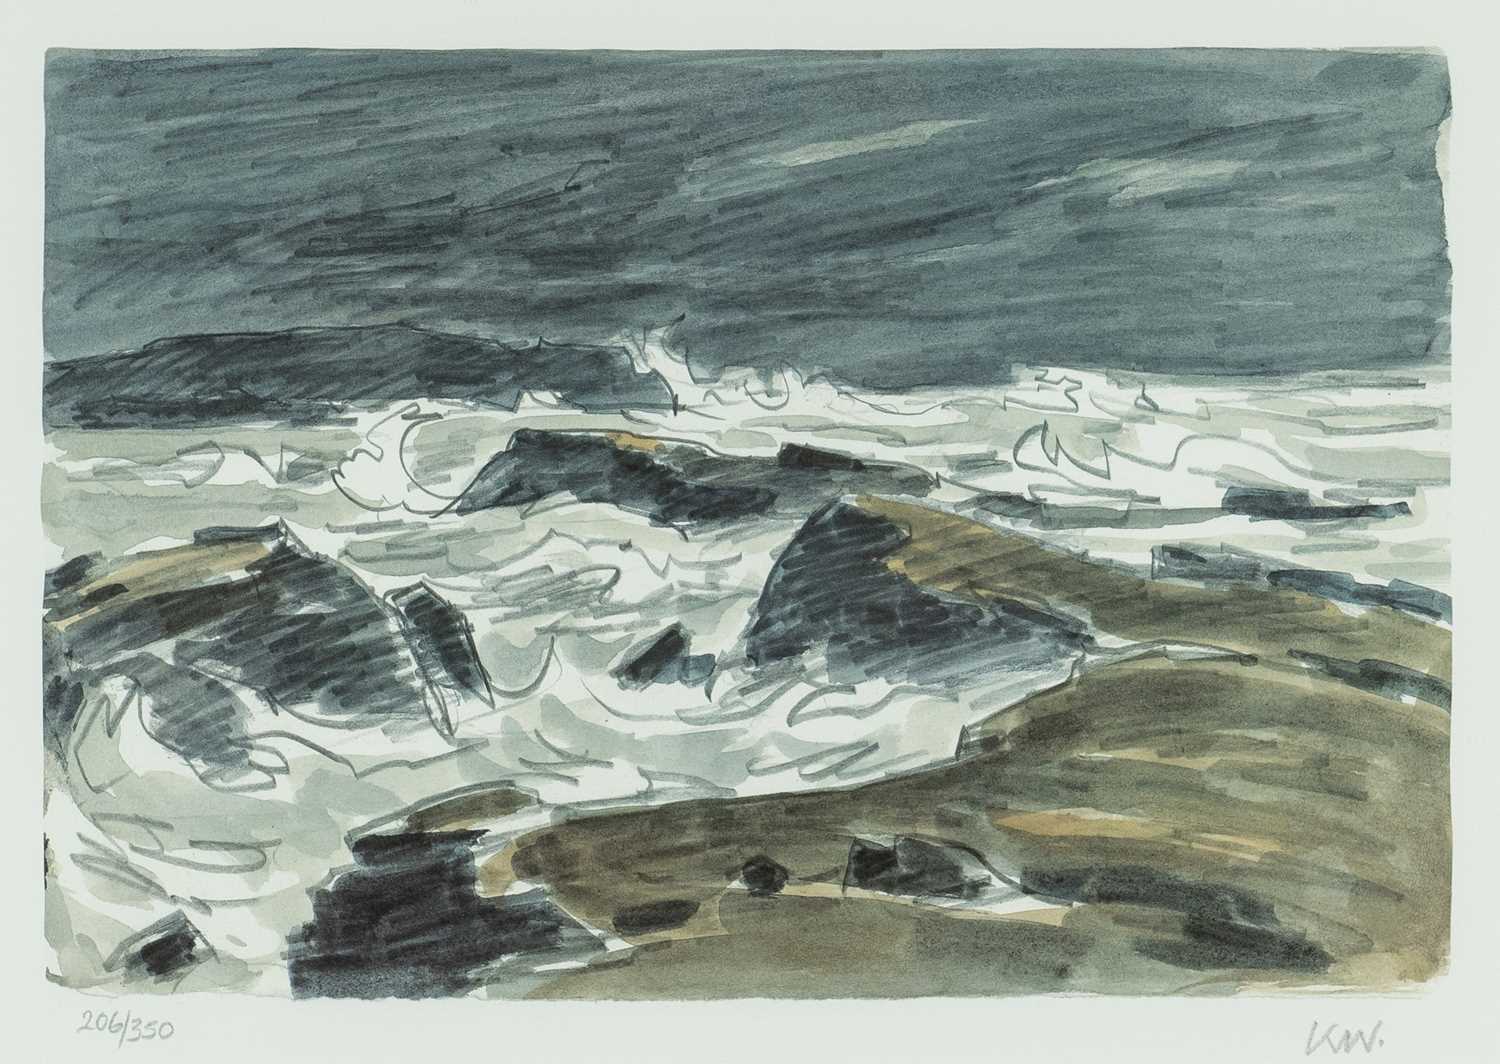 ‡ SIR KYFFIN WILLIAMS RA limited edition (206/350) lithograph - 'Sea at Trearddur', signed with